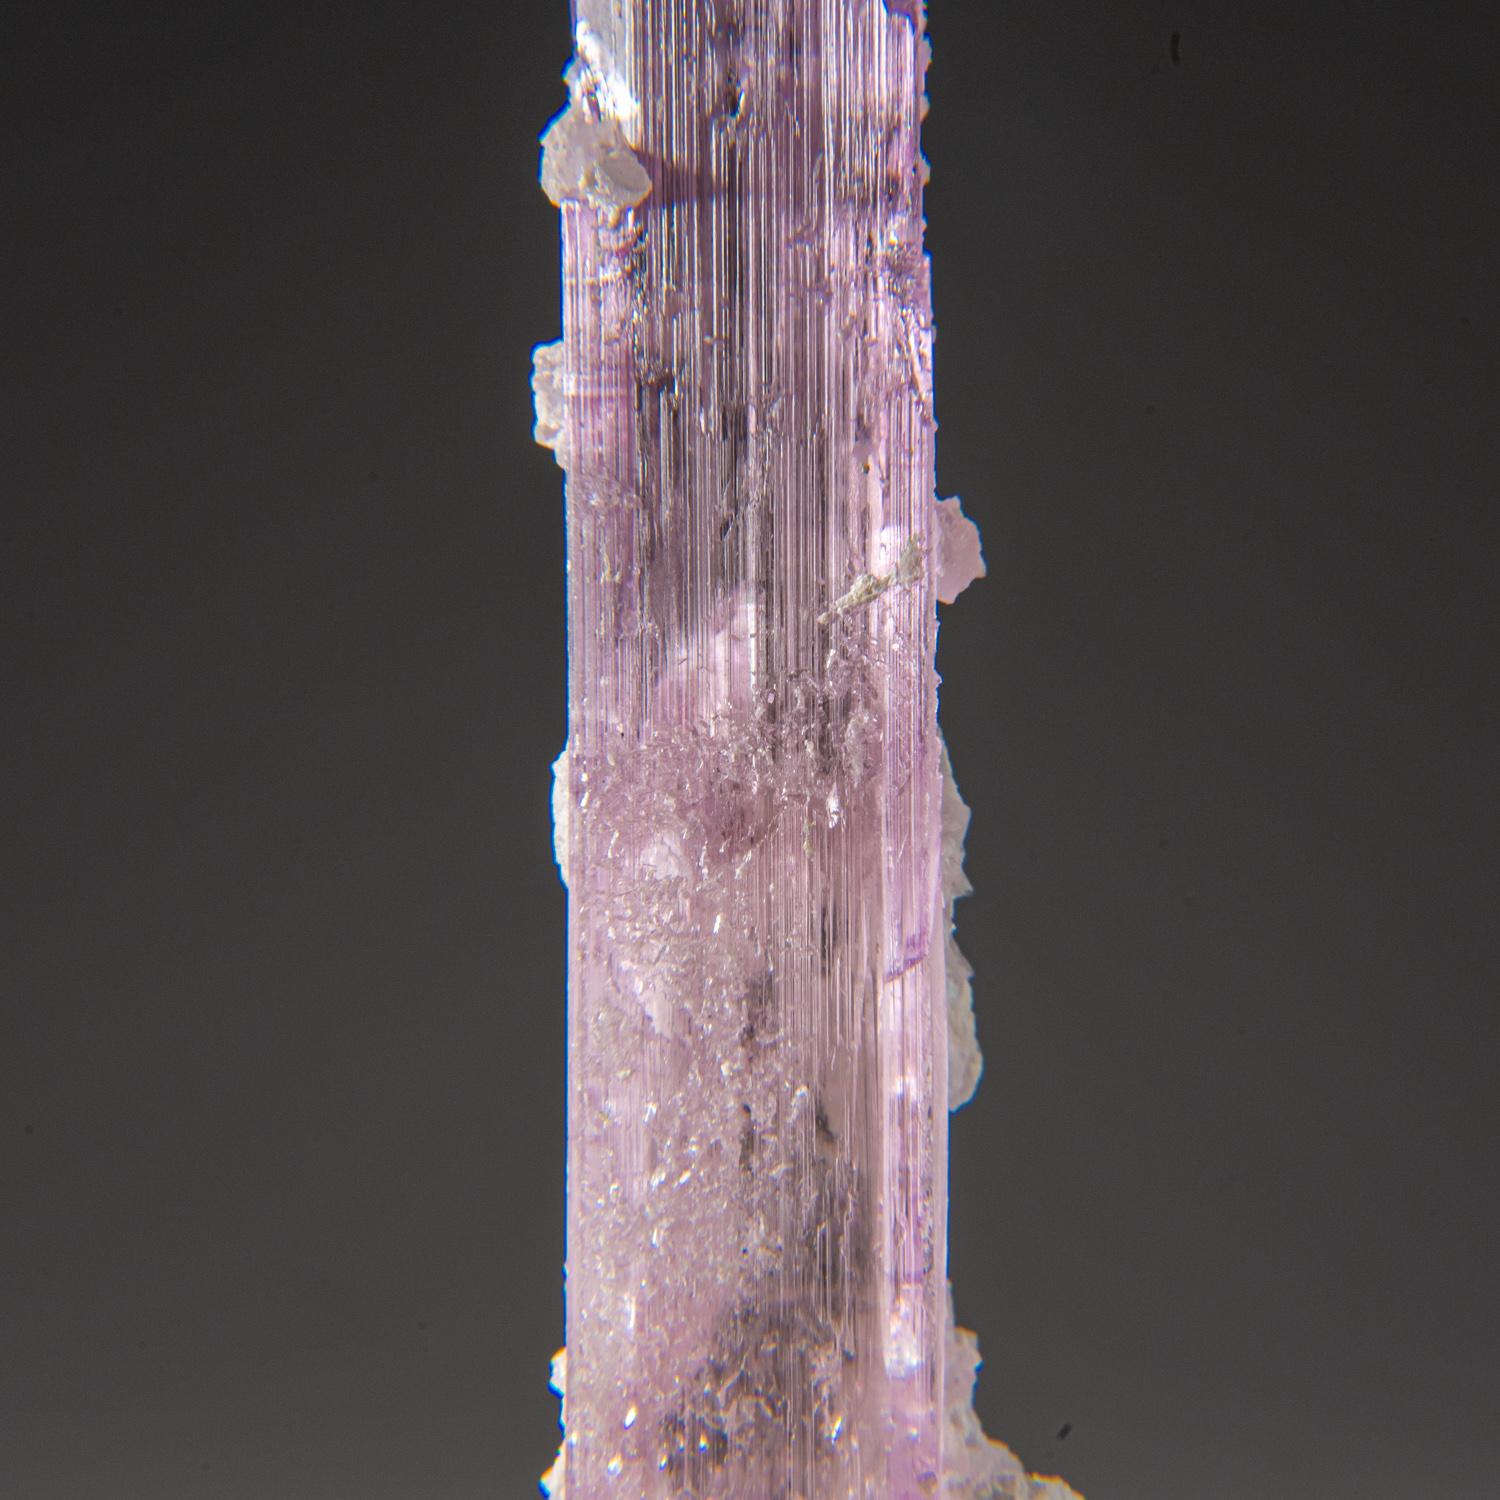 Other Kunzite Crystal from Nuristan Province, Afghanistan For Sale